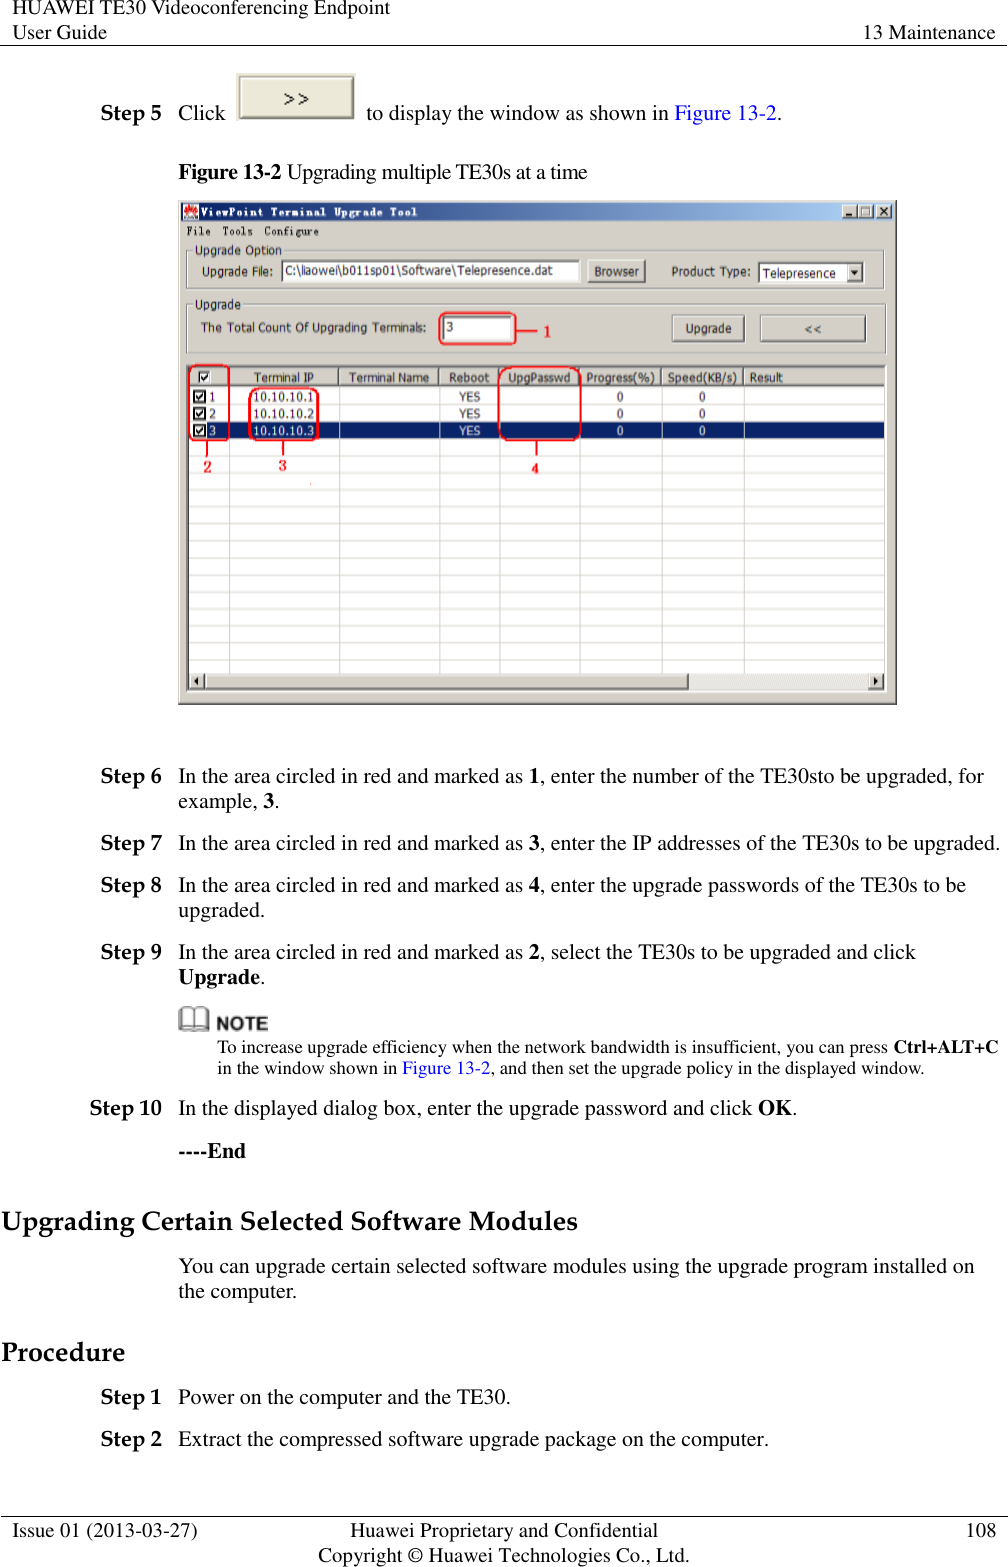 HUAWEI TE30 Videoconferencing Endpoint User Guide 13 Maintenance  Issue 01 (2013-03-27) Huawei Proprietary and Confidential                                     Copyright © Huawei Technologies Co., Ltd. 108  Step 5 Click    to display the window as shown in Figure 13-2. Figure 13-2 Upgrading multiple TE30s at a time   Step 6 In the area circled in red and marked as 1, enter the number of the TE30sto be upgraded, for example, 3. Step 7 In the area circled in red and marked as 3, enter the IP addresses of the TE30s to be upgraded. Step 8 In the area circled in red and marked as 4, enter the upgrade passwords of the TE30s to be upgraded. Step 9 In the area circled in red and marked as 2, select the TE30s to be upgraded and click Upgrade.  To increase upgrade efficiency when the network bandwidth is insufficient, you can press Ctrl+ALT+C in the window shown in Figure 13-2, and then set the upgrade policy in the displayed window. Step 10 In the displayed dialog box, enter the upgrade password and click OK. ----End Upgrading Certain Selected Software Modules You can upgrade certain selected software modules using the upgrade program installed on the computer. Procedure Step 1 Power on the computer and the TE30. Step 2 Extract the compressed software upgrade package on the computer.   